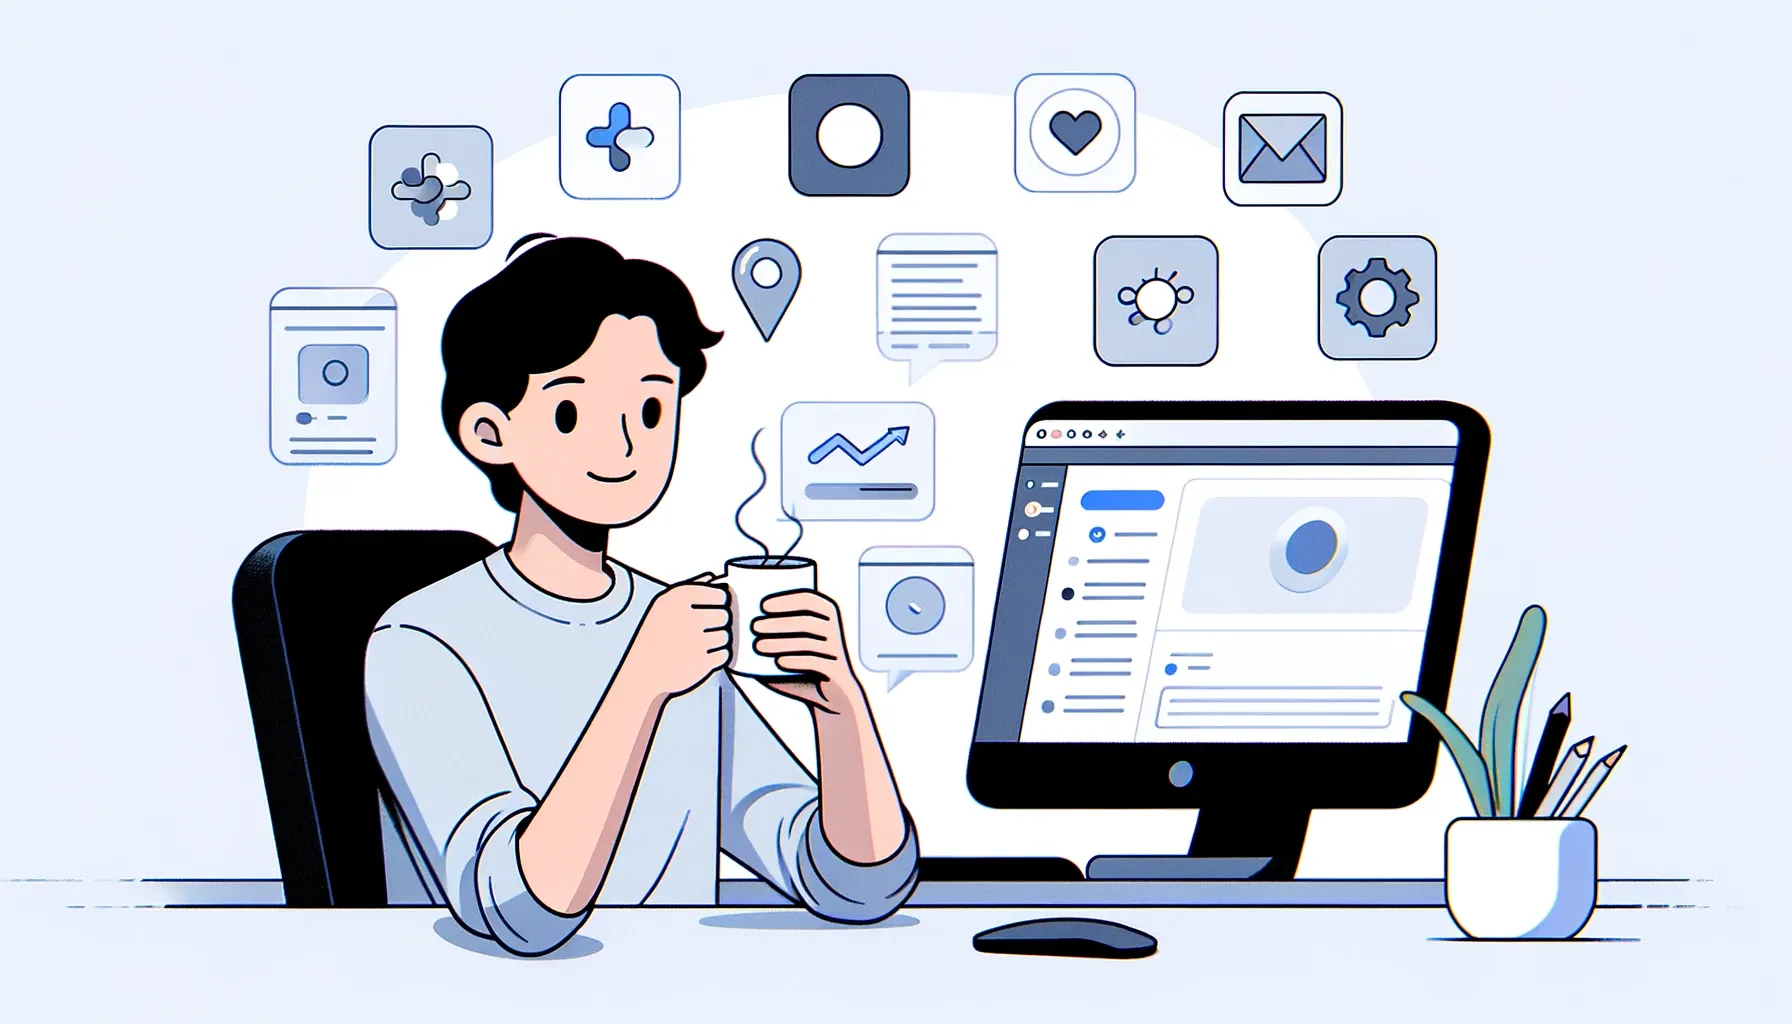 Illustration of a person sitting at a desk with a coffee cup, in front of a computer with various application icons in the background.